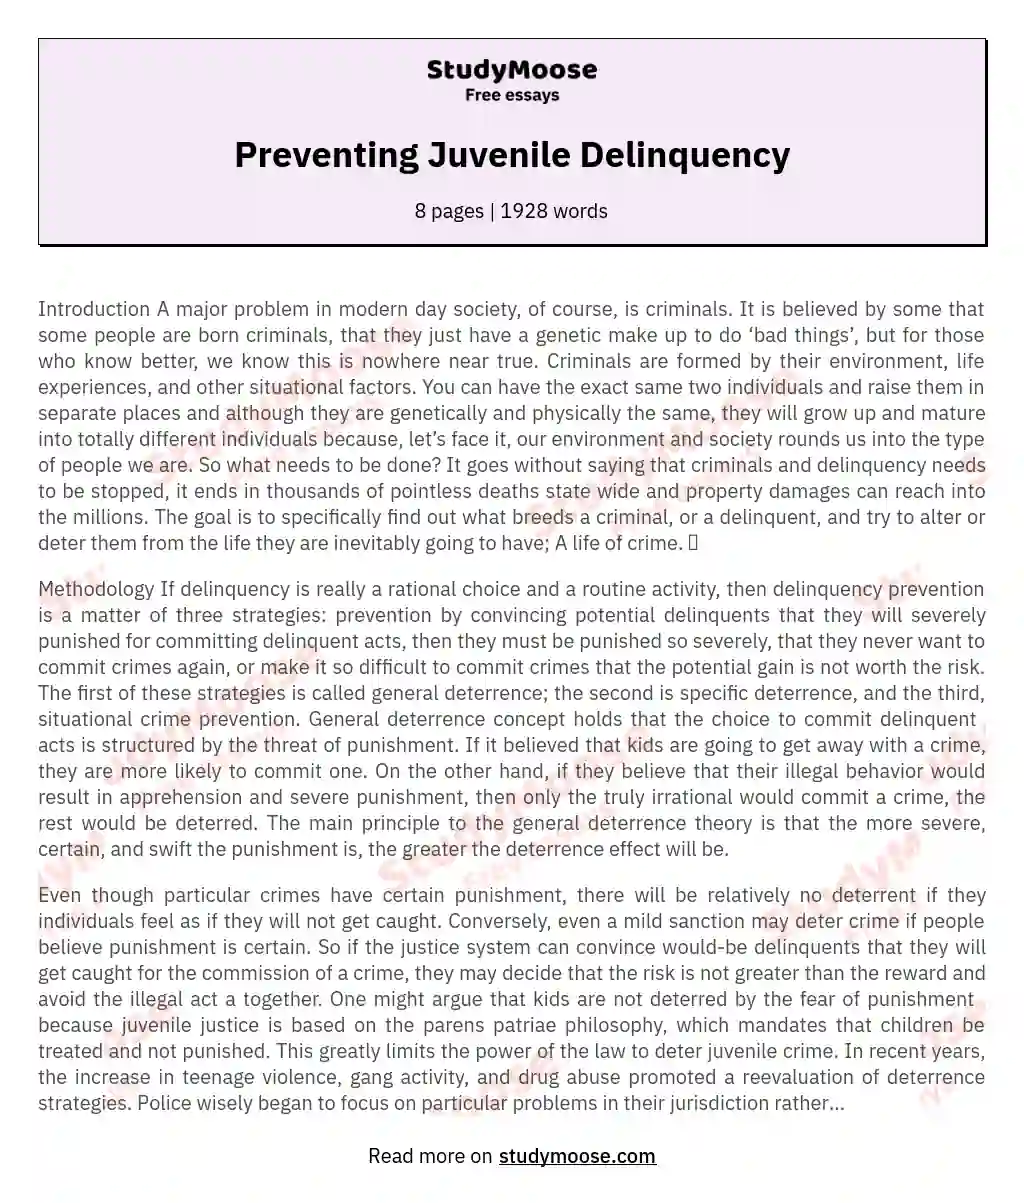 bad parenting and juvenile delinquency essay